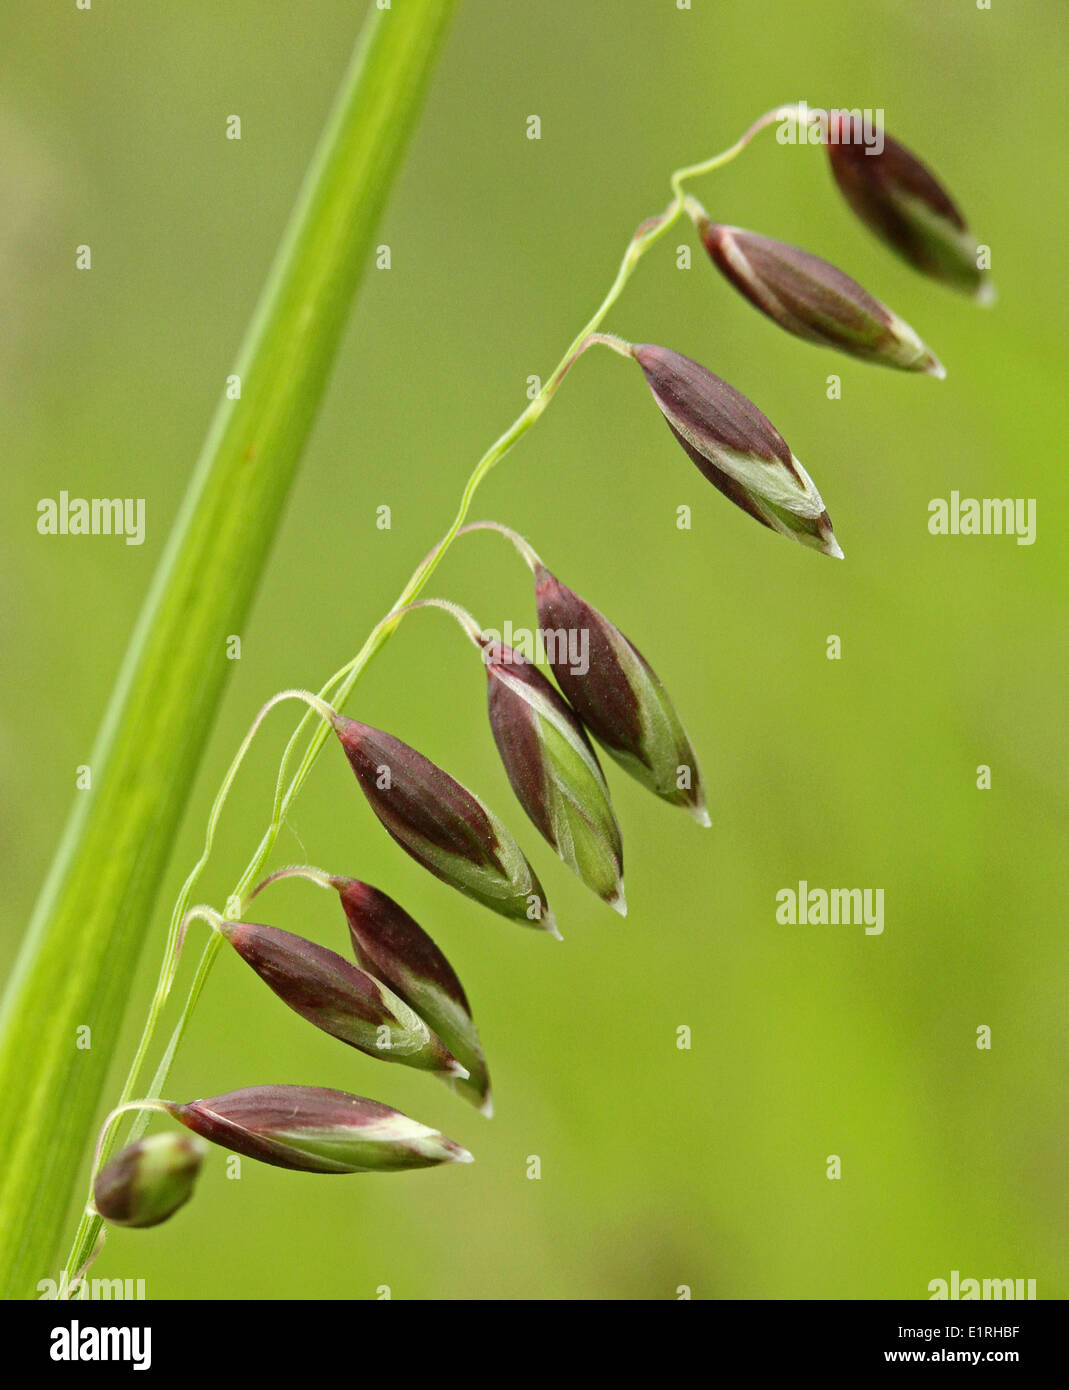 side view of flowering stalk Stock Photo